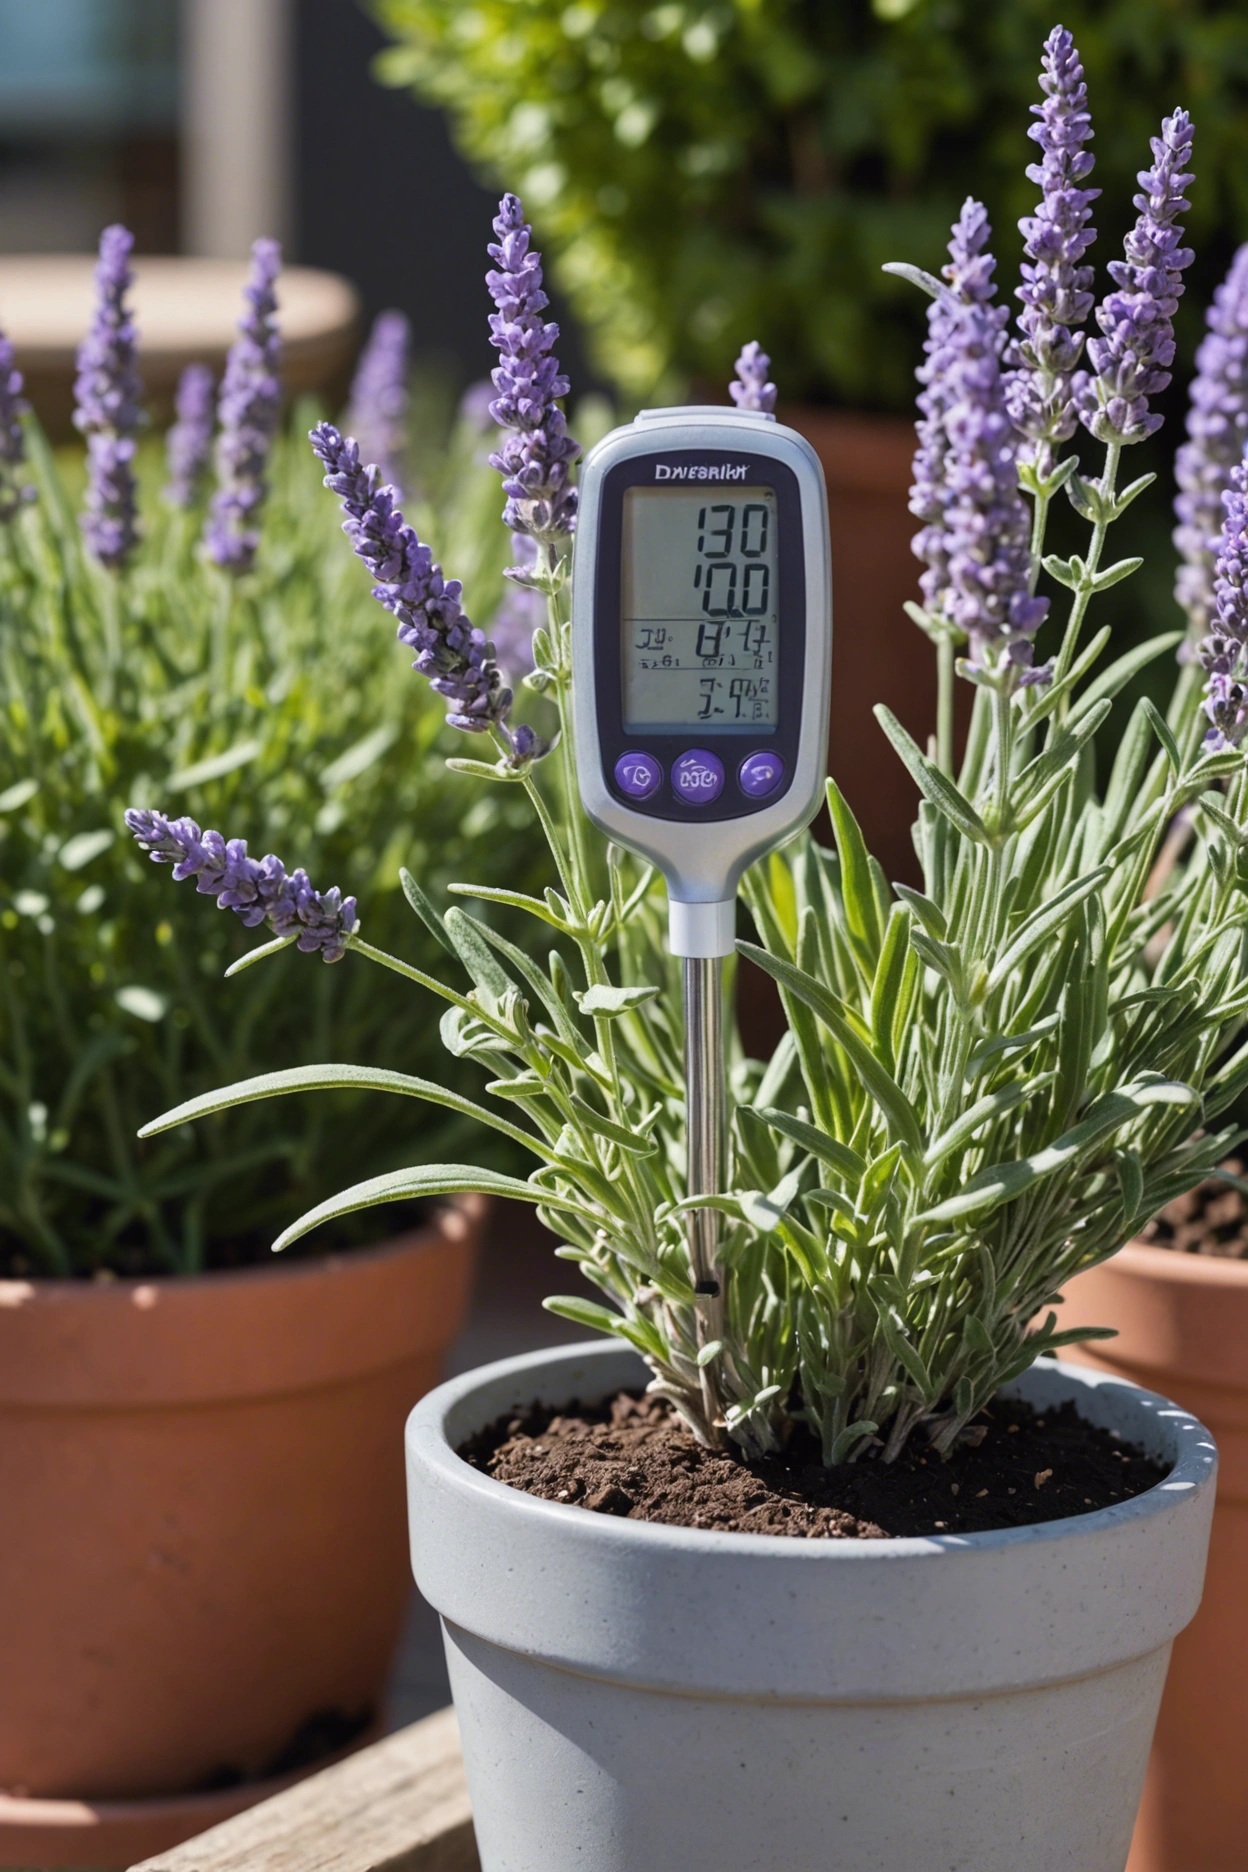 "Healthy lavender plant in a pot next to a moderate temperature thermometer, with less thriving lavender in the background."